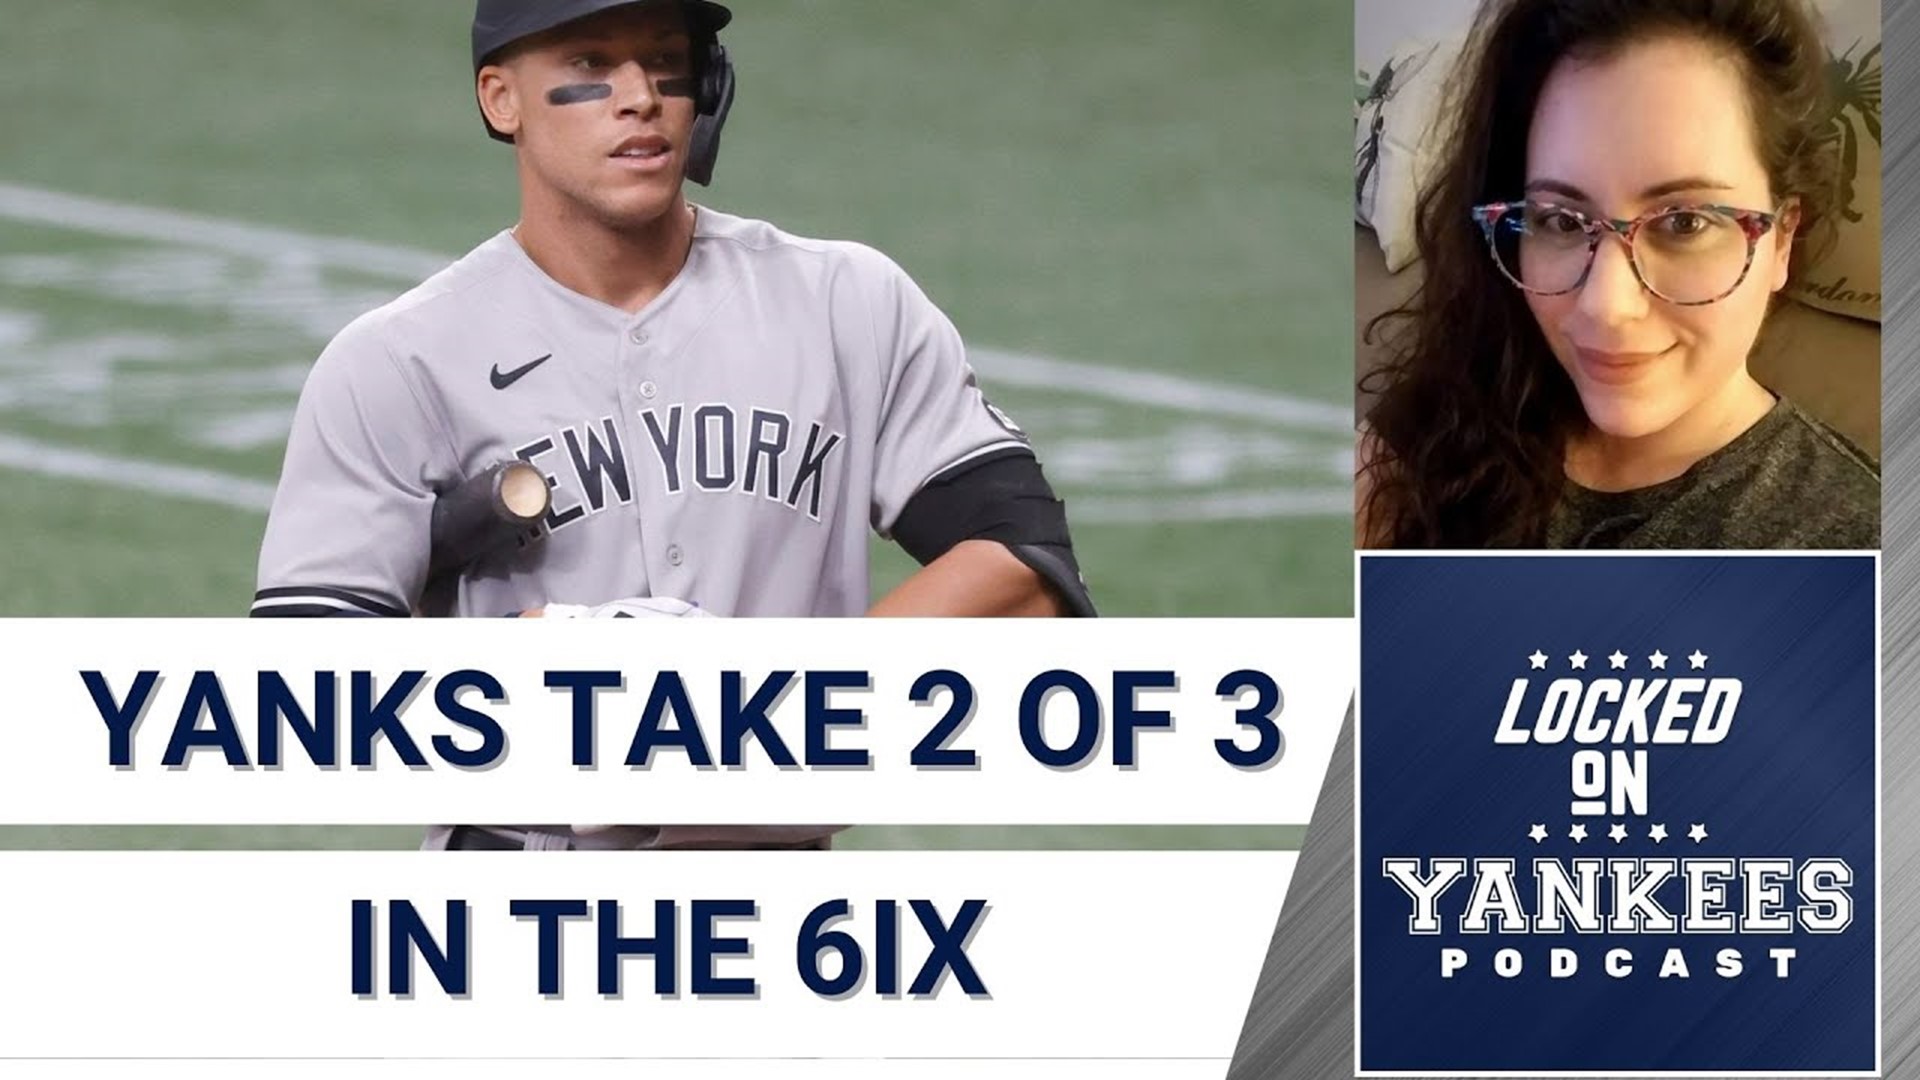 The Yankees took two of three from the Blue Jays in Toronto which is good but the series ended on a sour note thanks to a bullpen implosion.